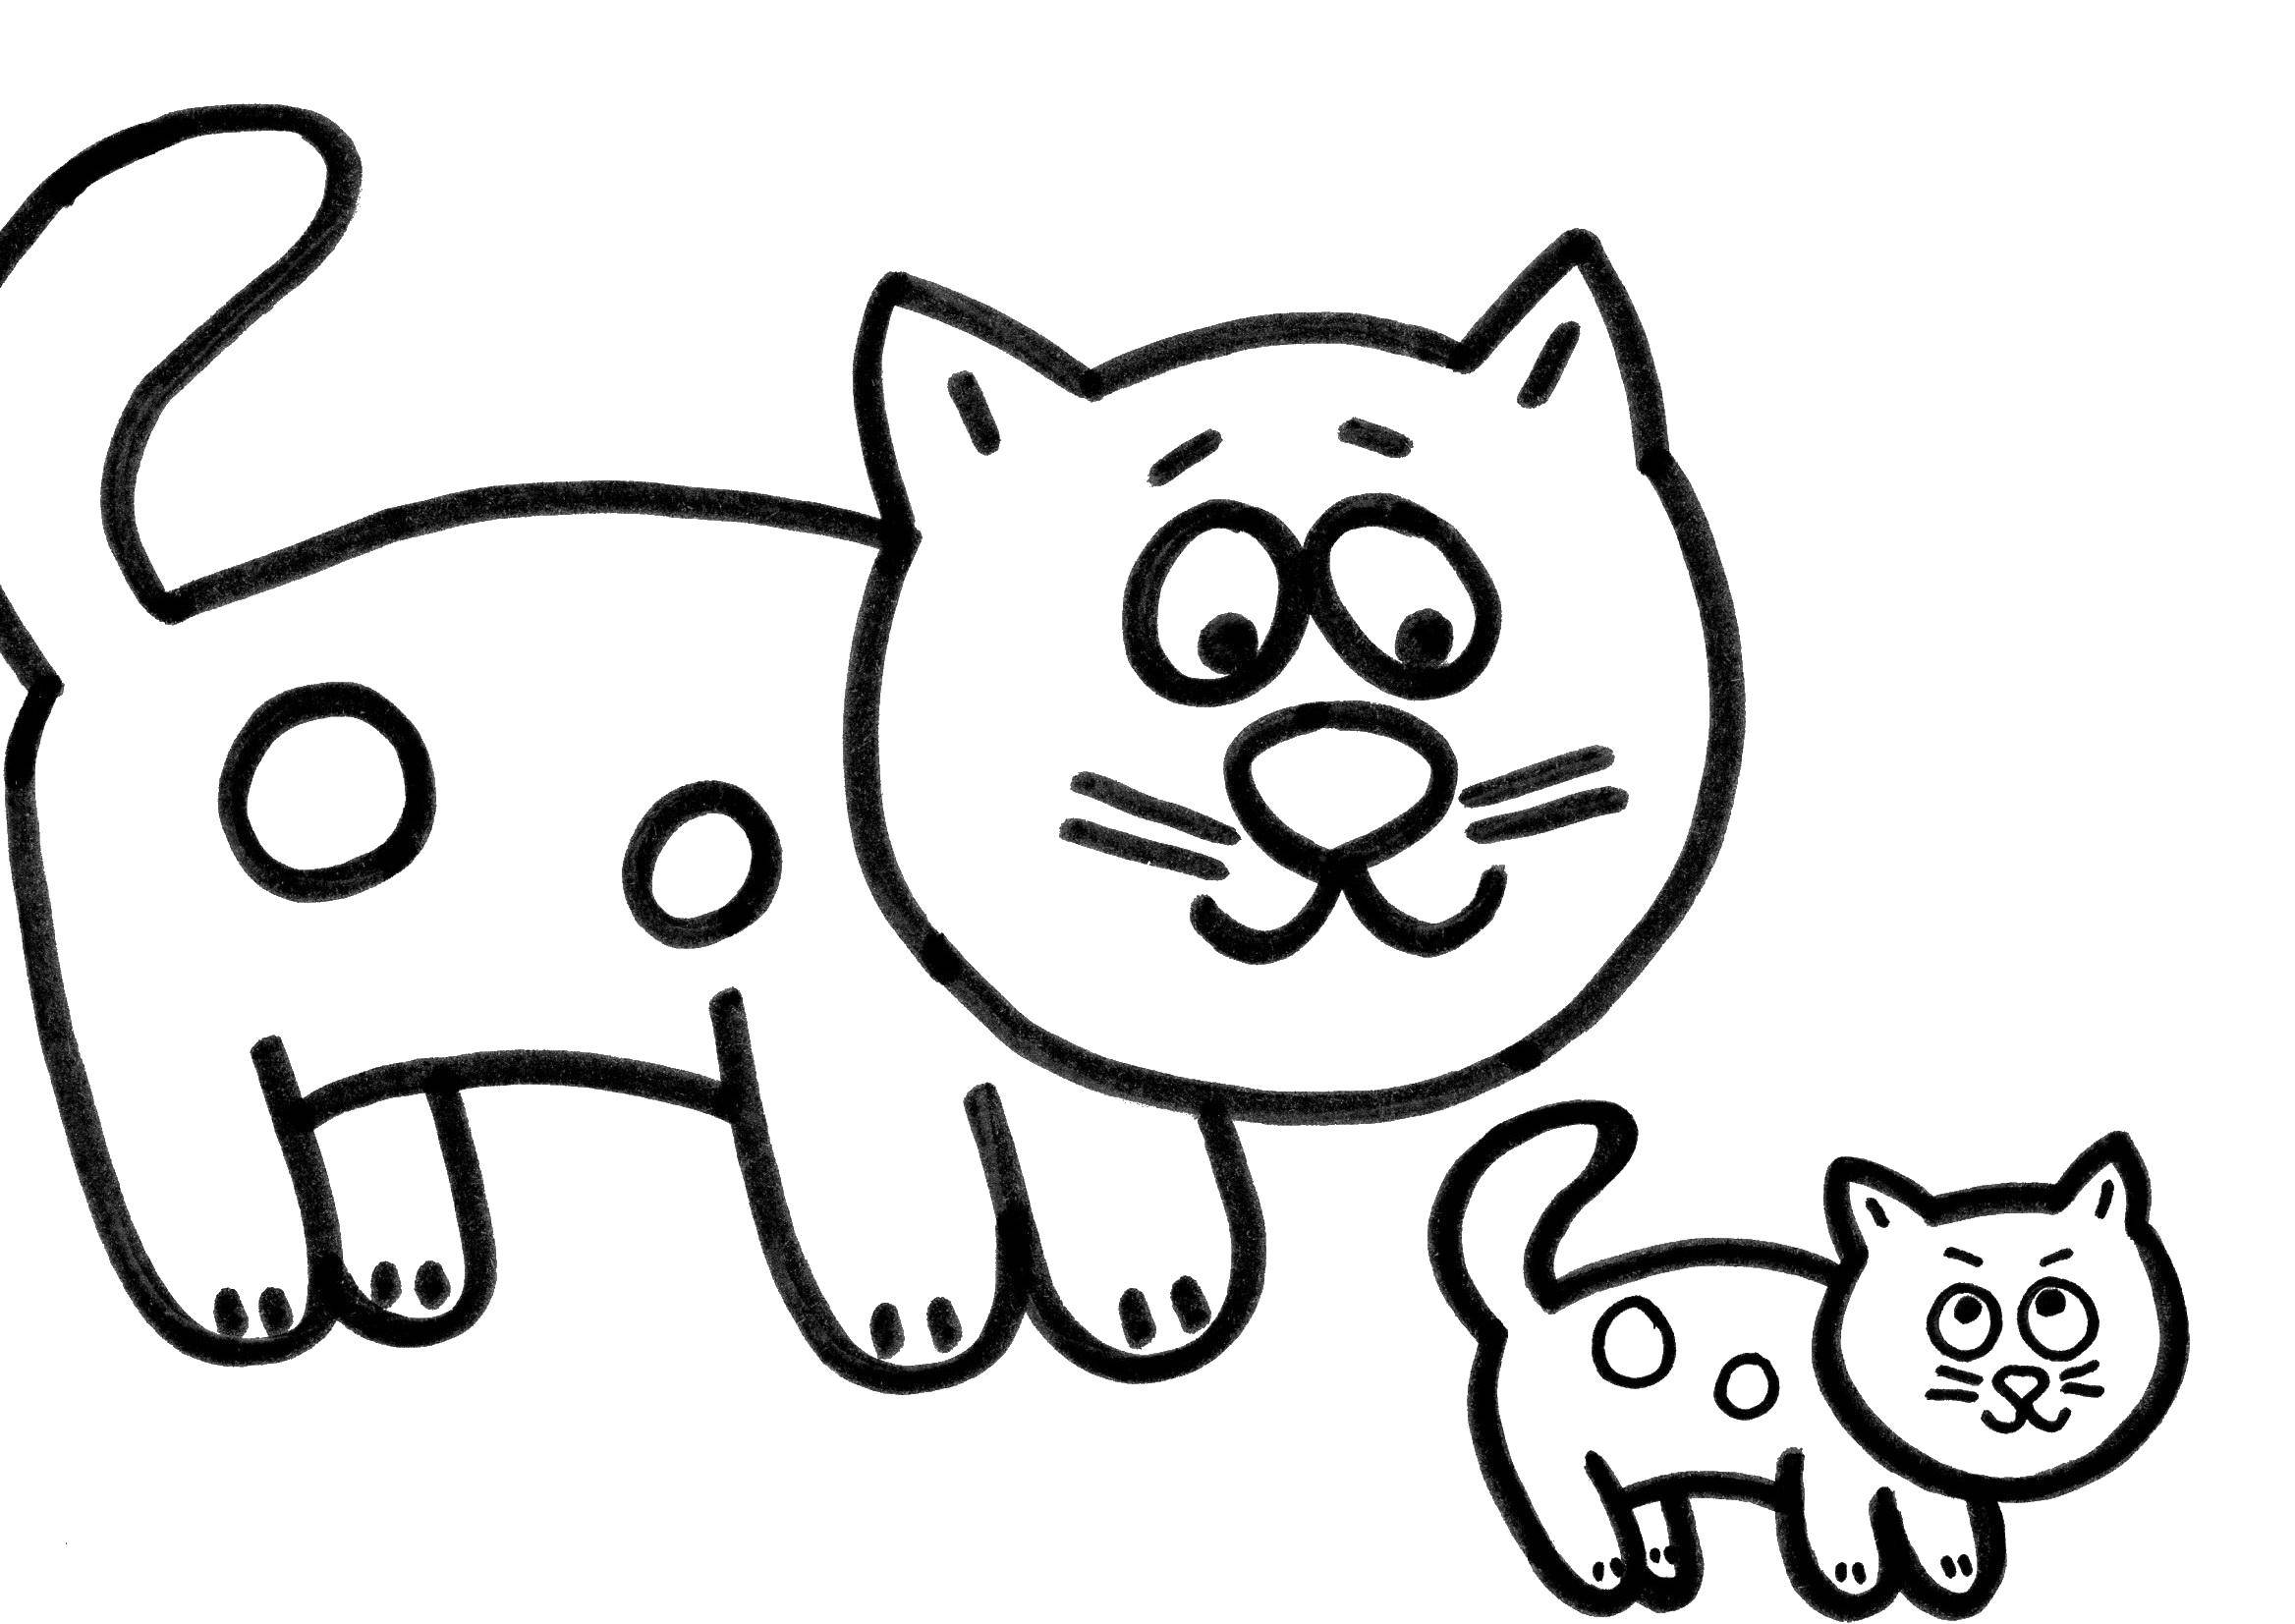 Coloring Kitties. Category Animals. Tags:  animals, kitten, cat.